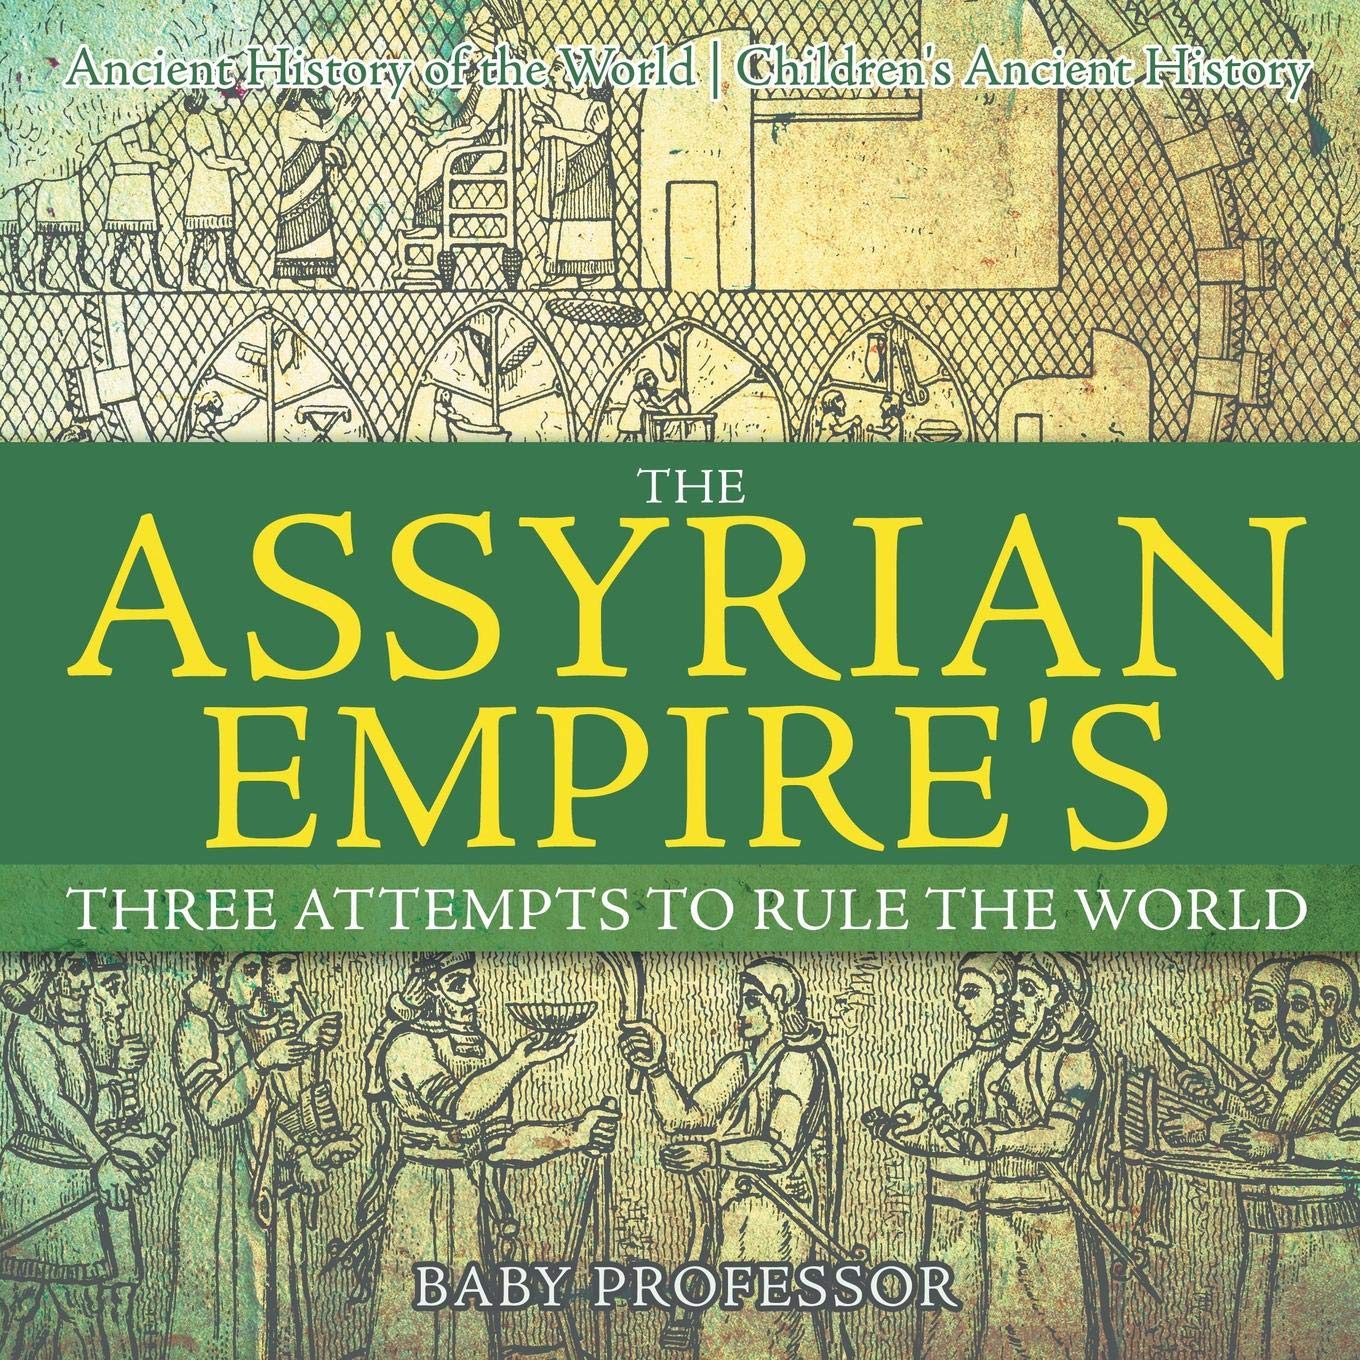 The Assyrian Empire's Three Attempts to Rule the World : Ancient History of the World | Children's Ancient History